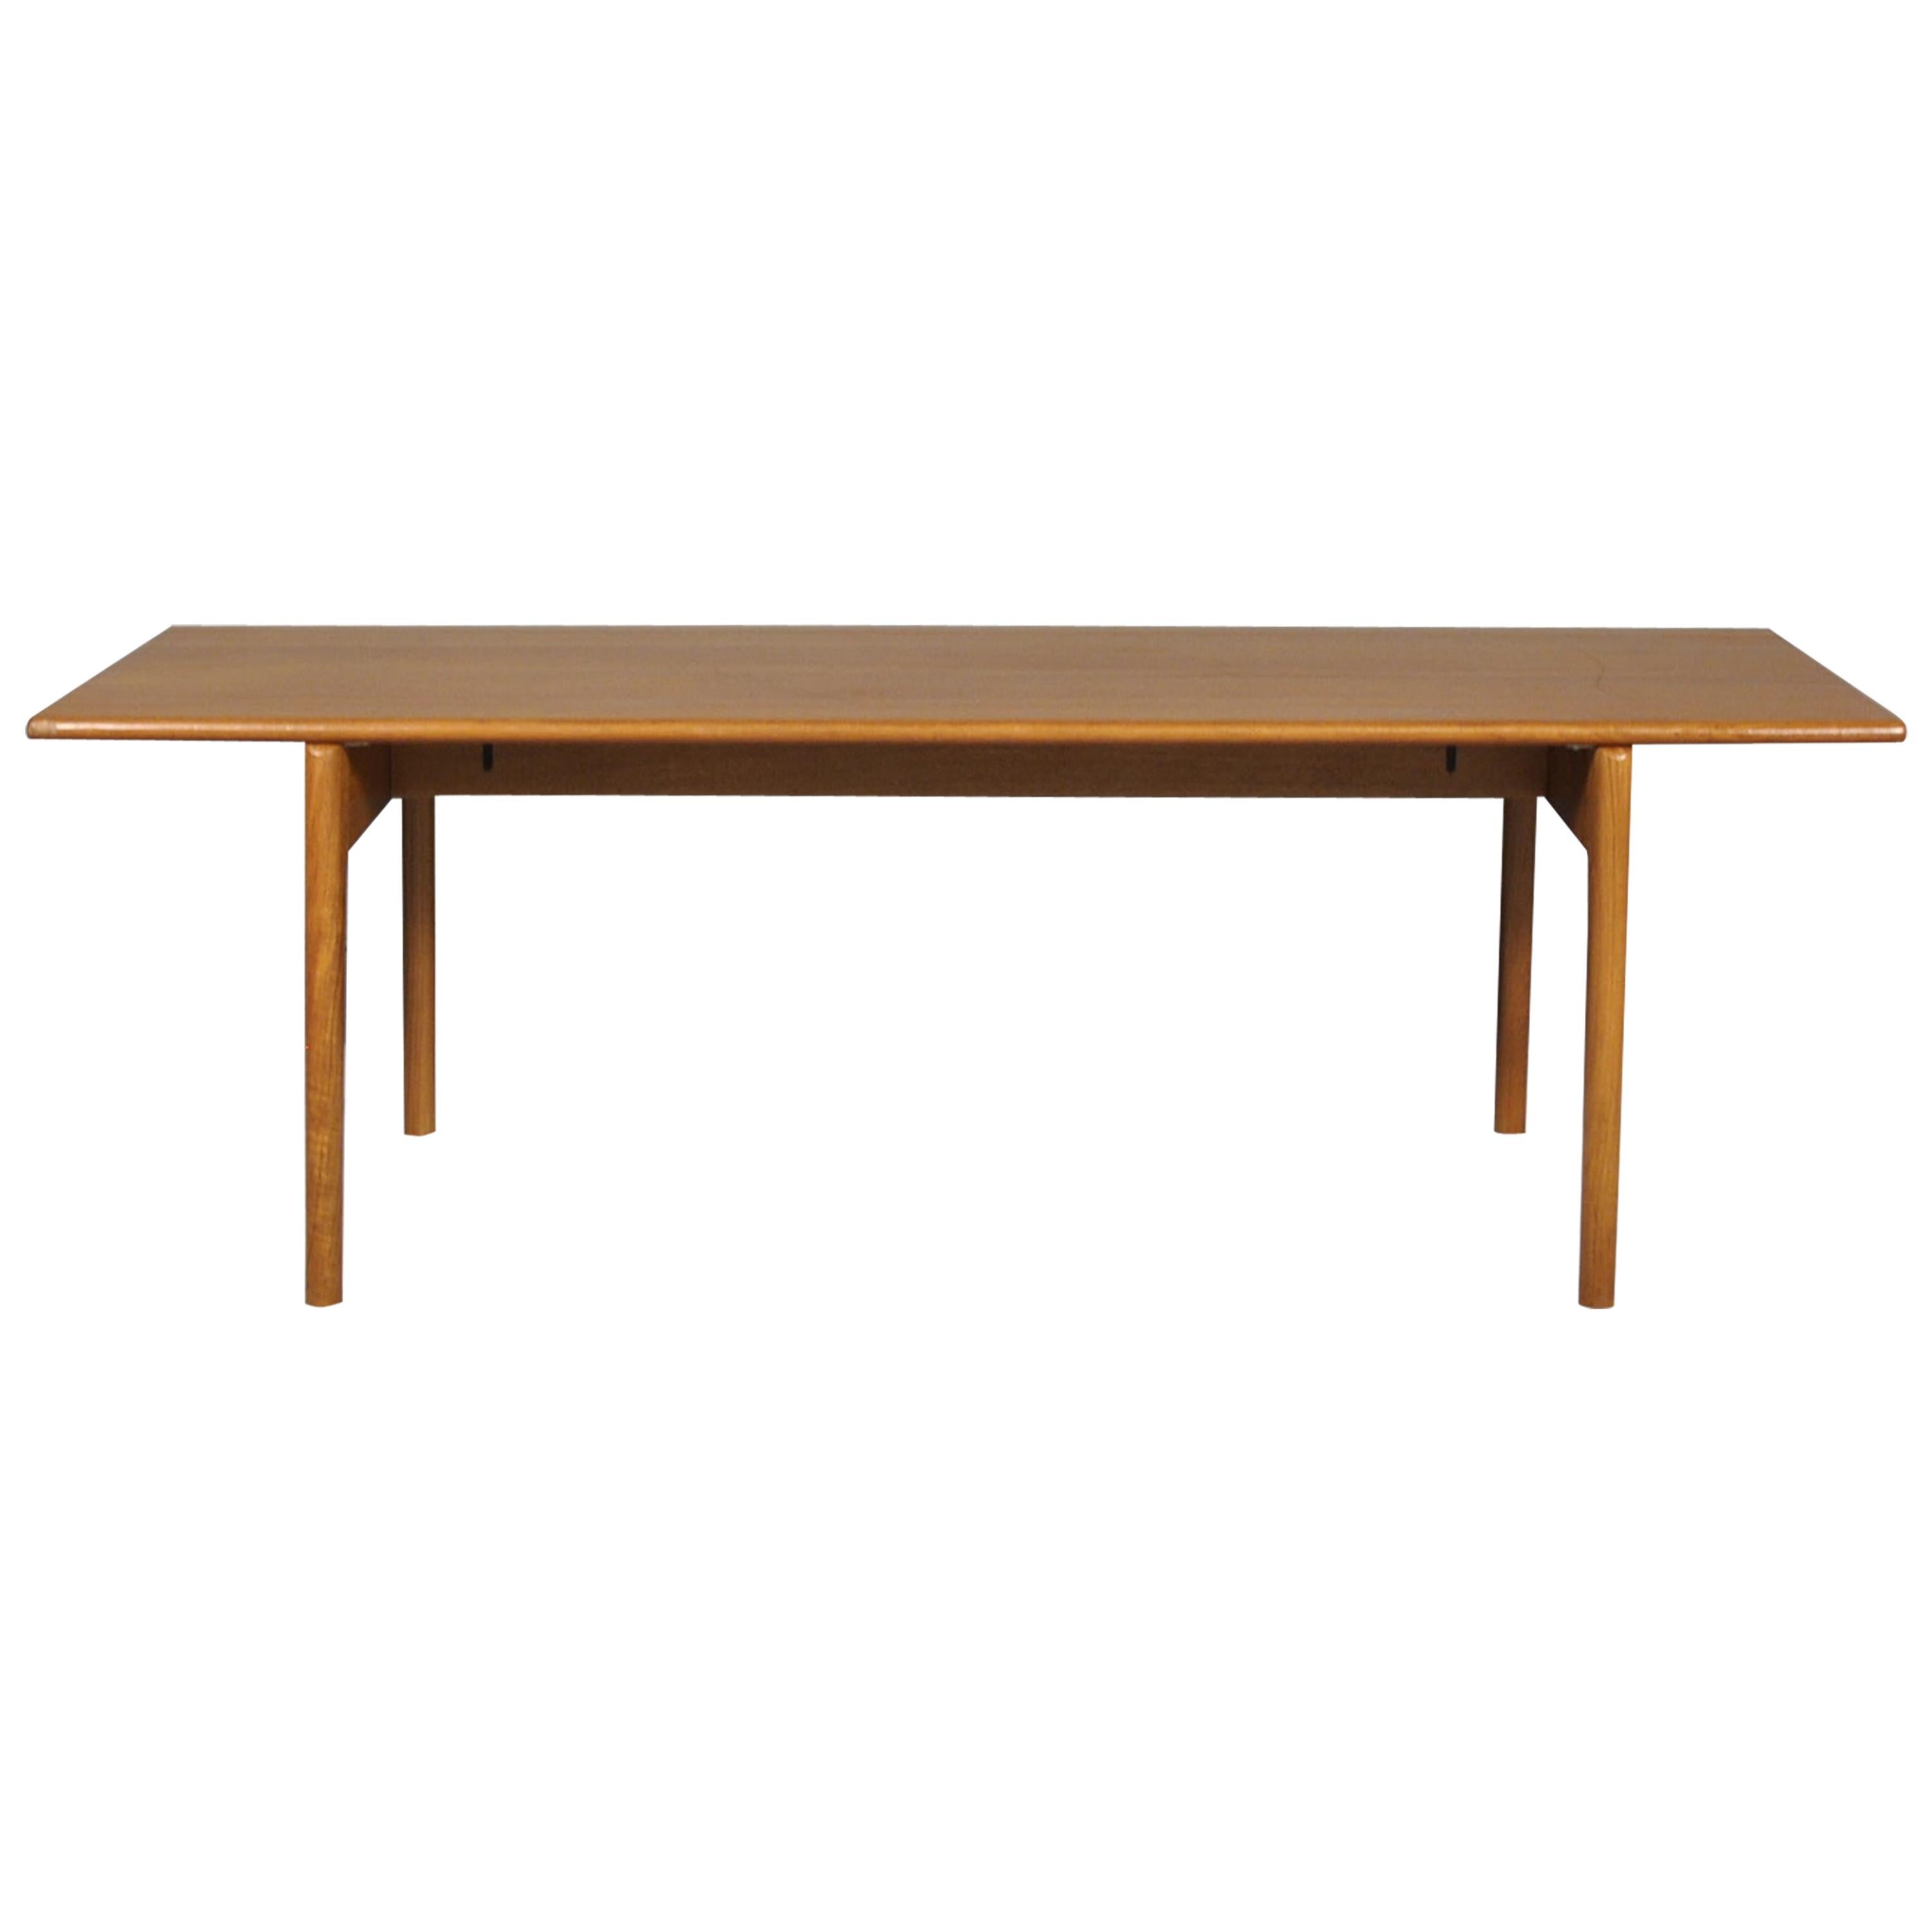 AT-15 Coffee Table by Hans J. Wegner for Andreas Tuck, 1960s For Sale